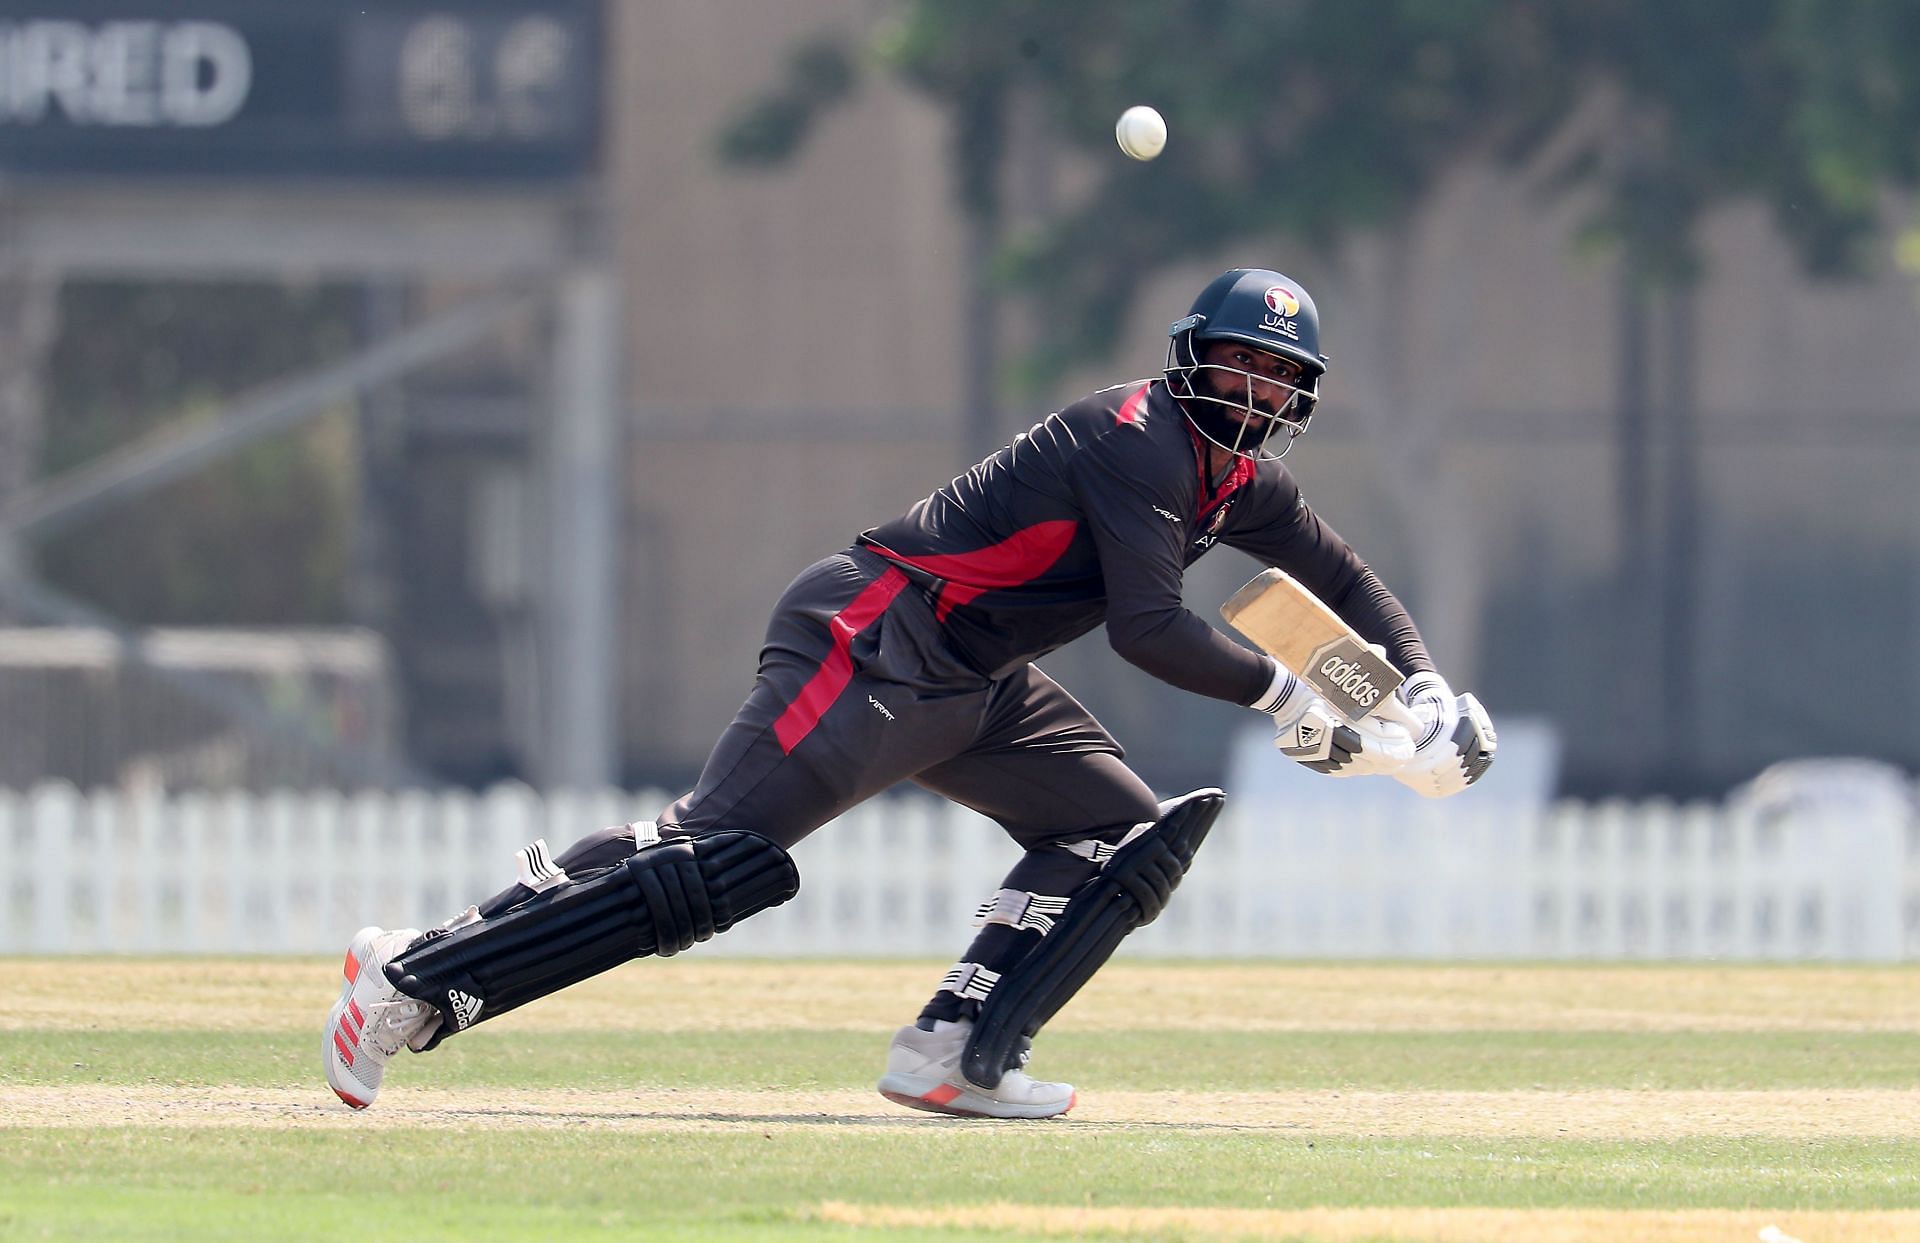 Muhammad Waseem in action for UAE (Image Courtesy: The National)